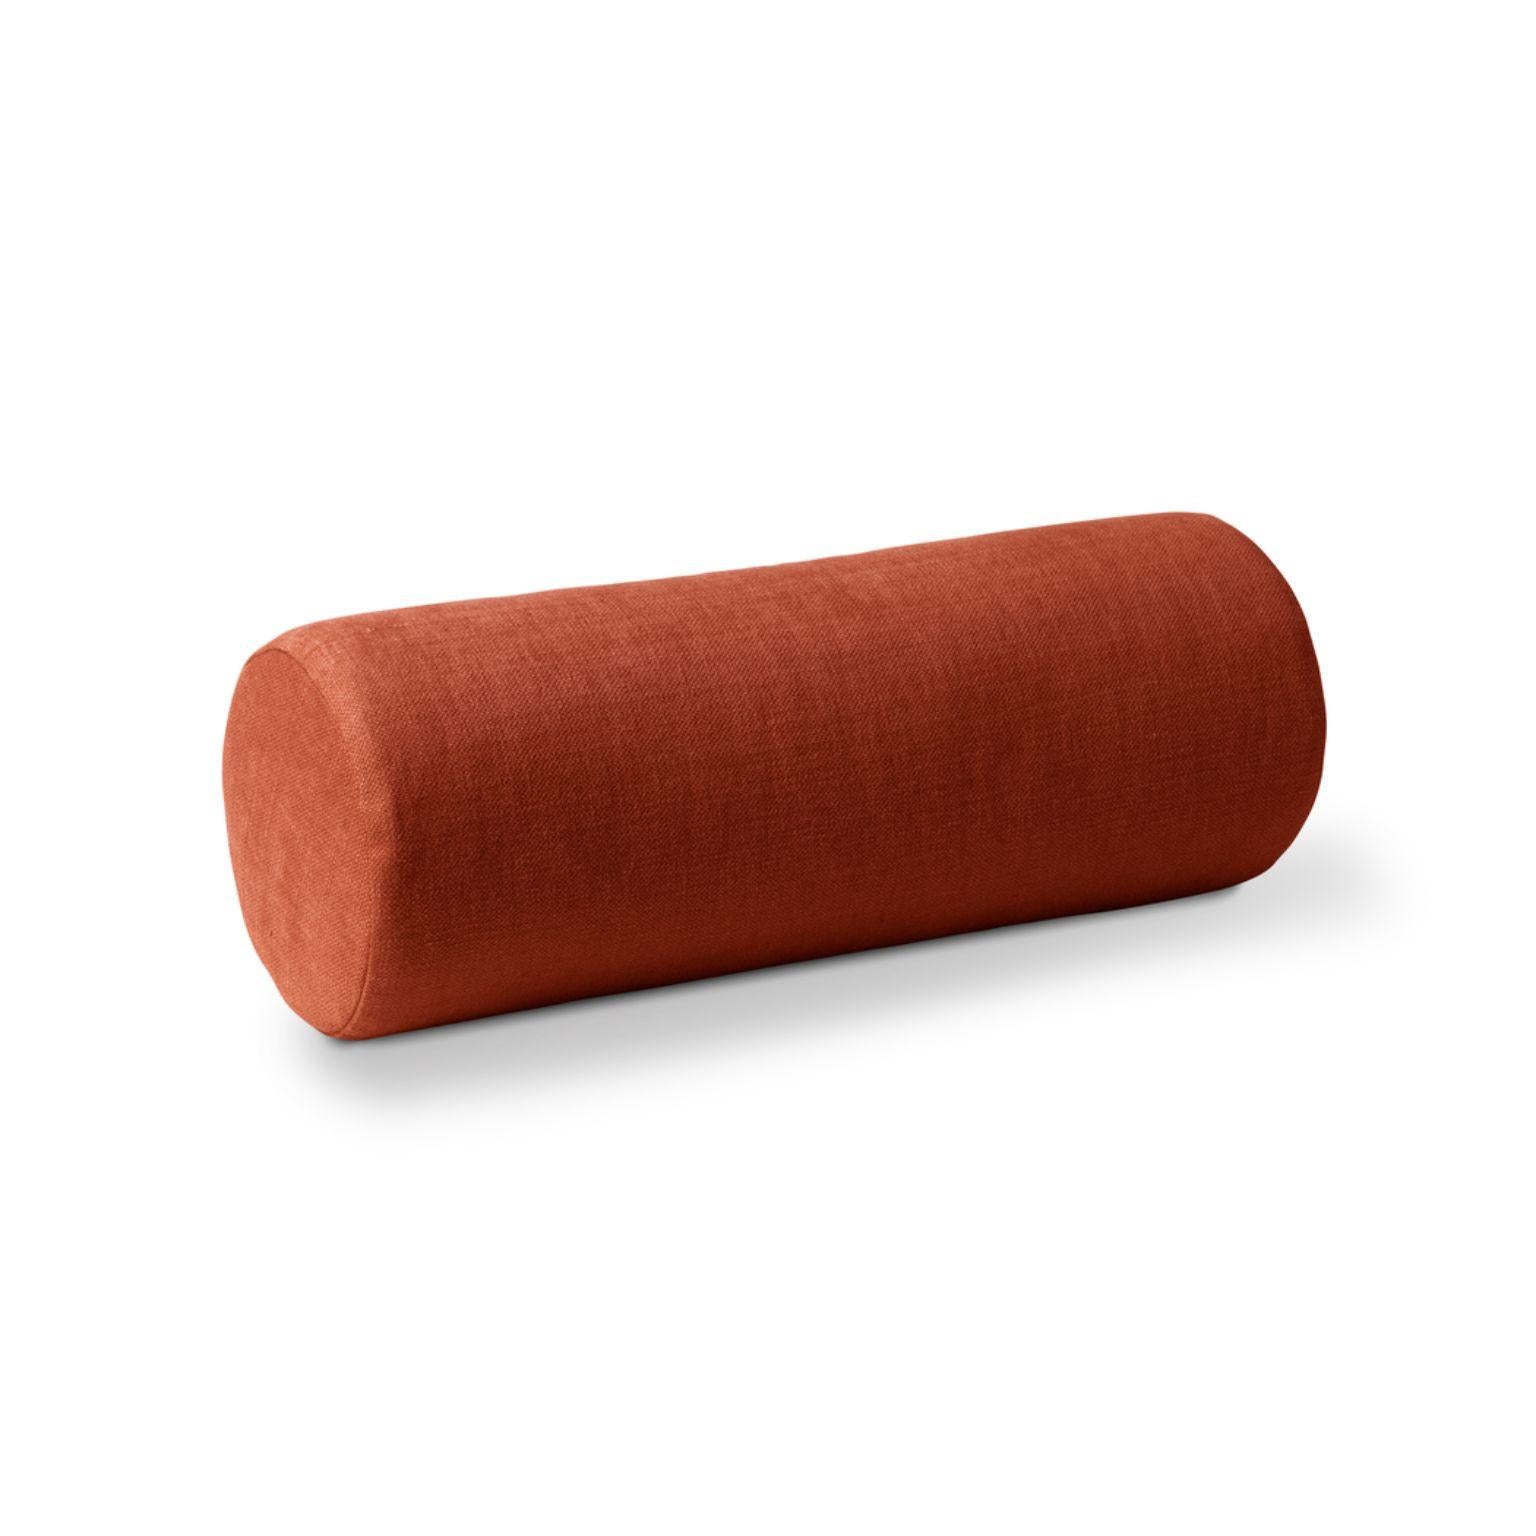 Galore cushion maple red by Warm Nordic
Dimensions: D 16 x H 46 cm
Material: Textile upholstery, Granulate and feathers filling.
Weight: 0.9 kg
Also available in different colours and finishes.

An elegant bolster cushion, which matches the